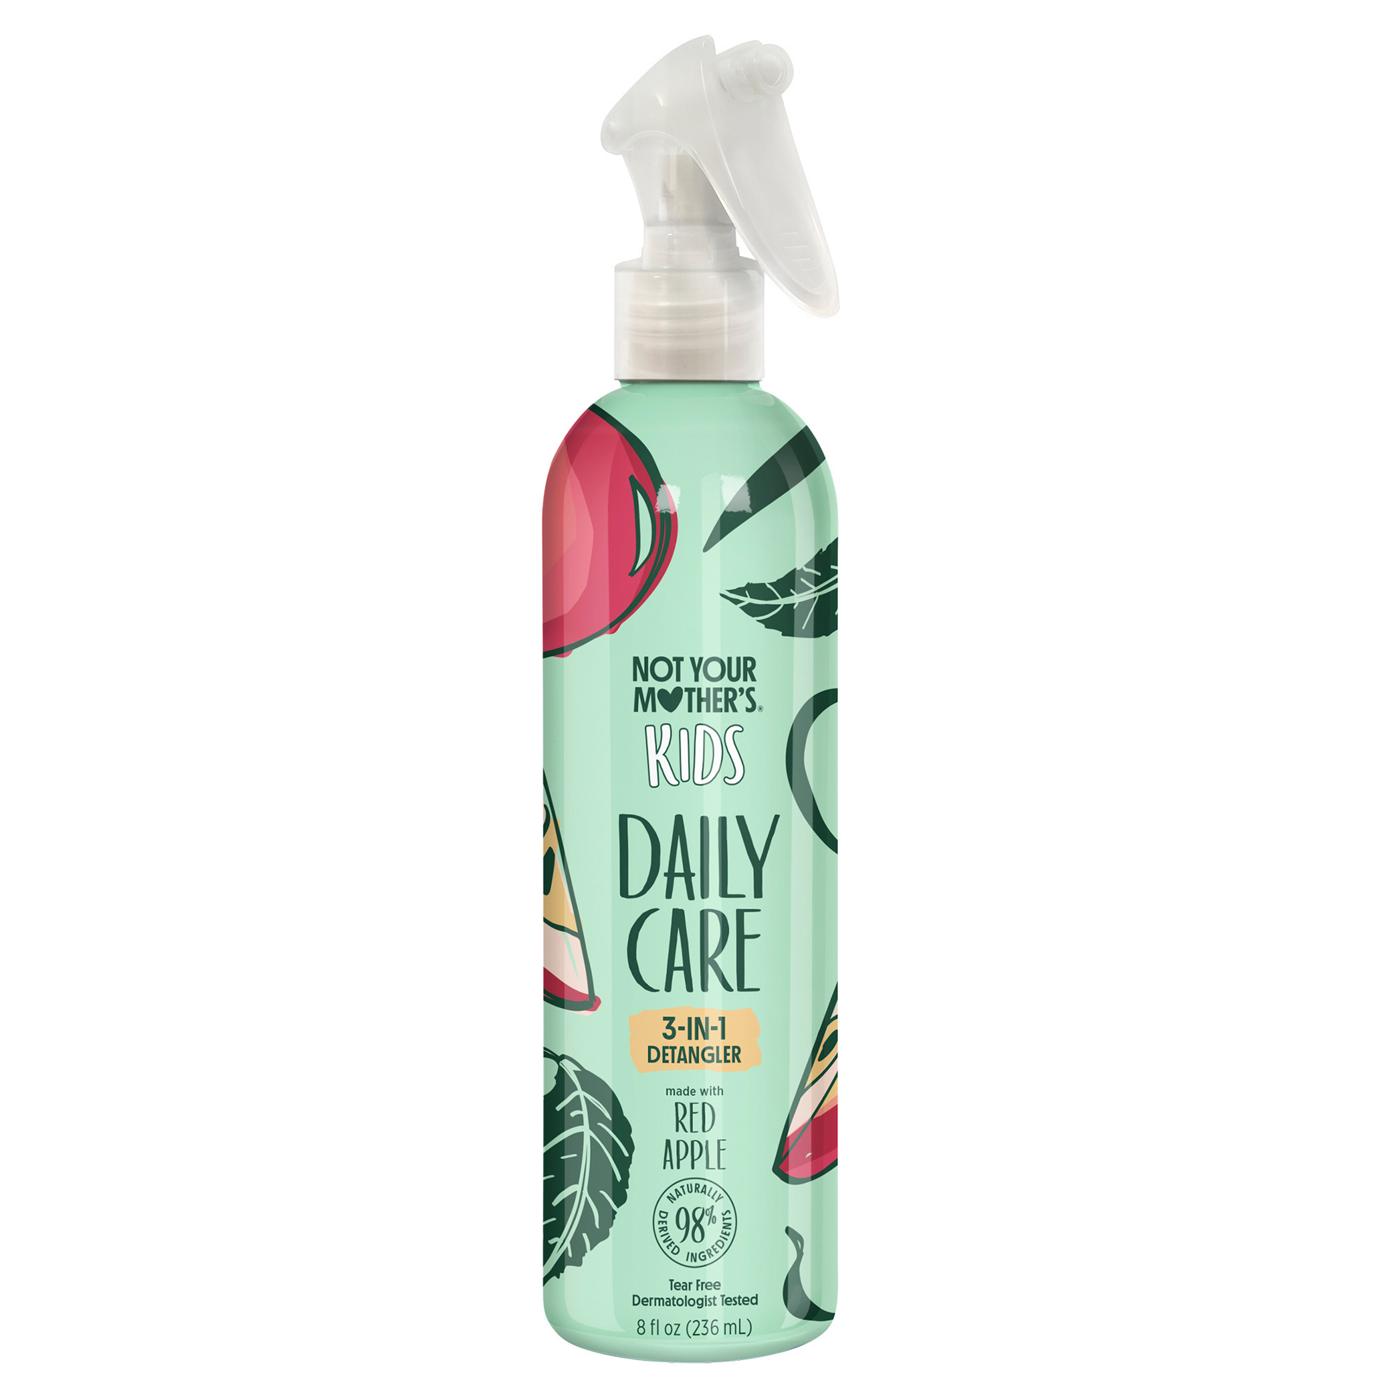 Not Your Mother's Tear Free Daily Care 3-in-1 Detangler; image 1 of 2